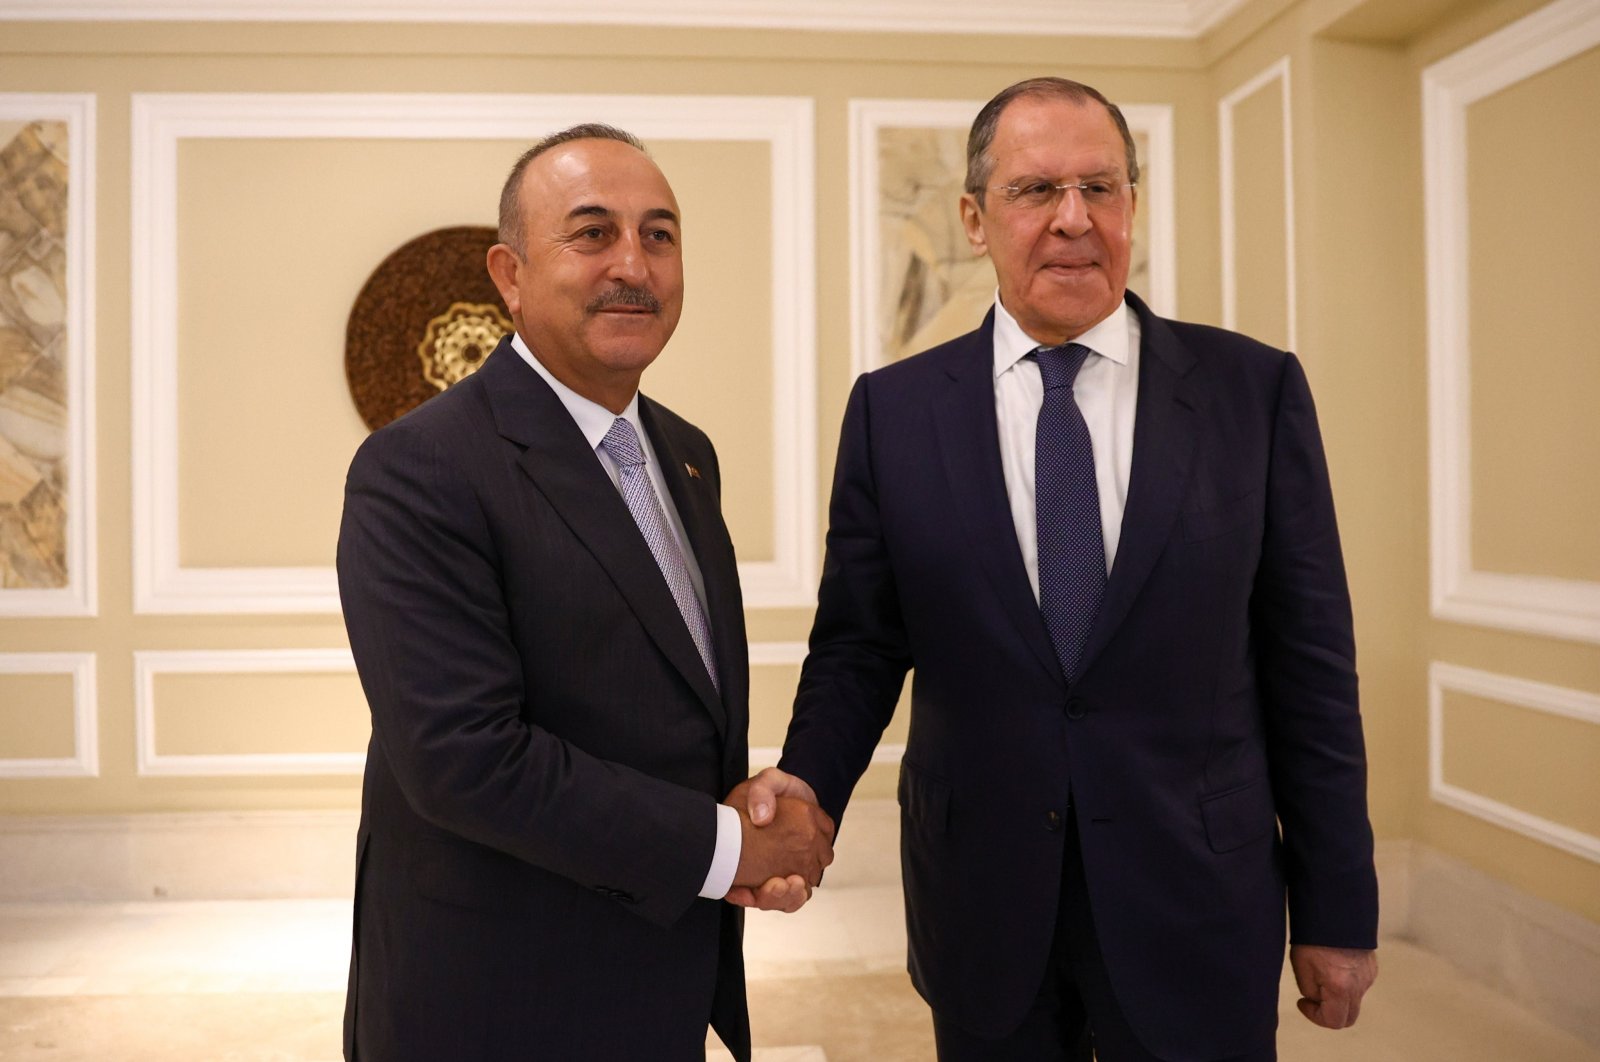 Foreign Minister Mevlüt Çavuşoğlu (L) and Russian Foreign Minister Sergey Lavrov shakes hands at a meeting in Indonesia, July 7, 2022. (IHA Photo)